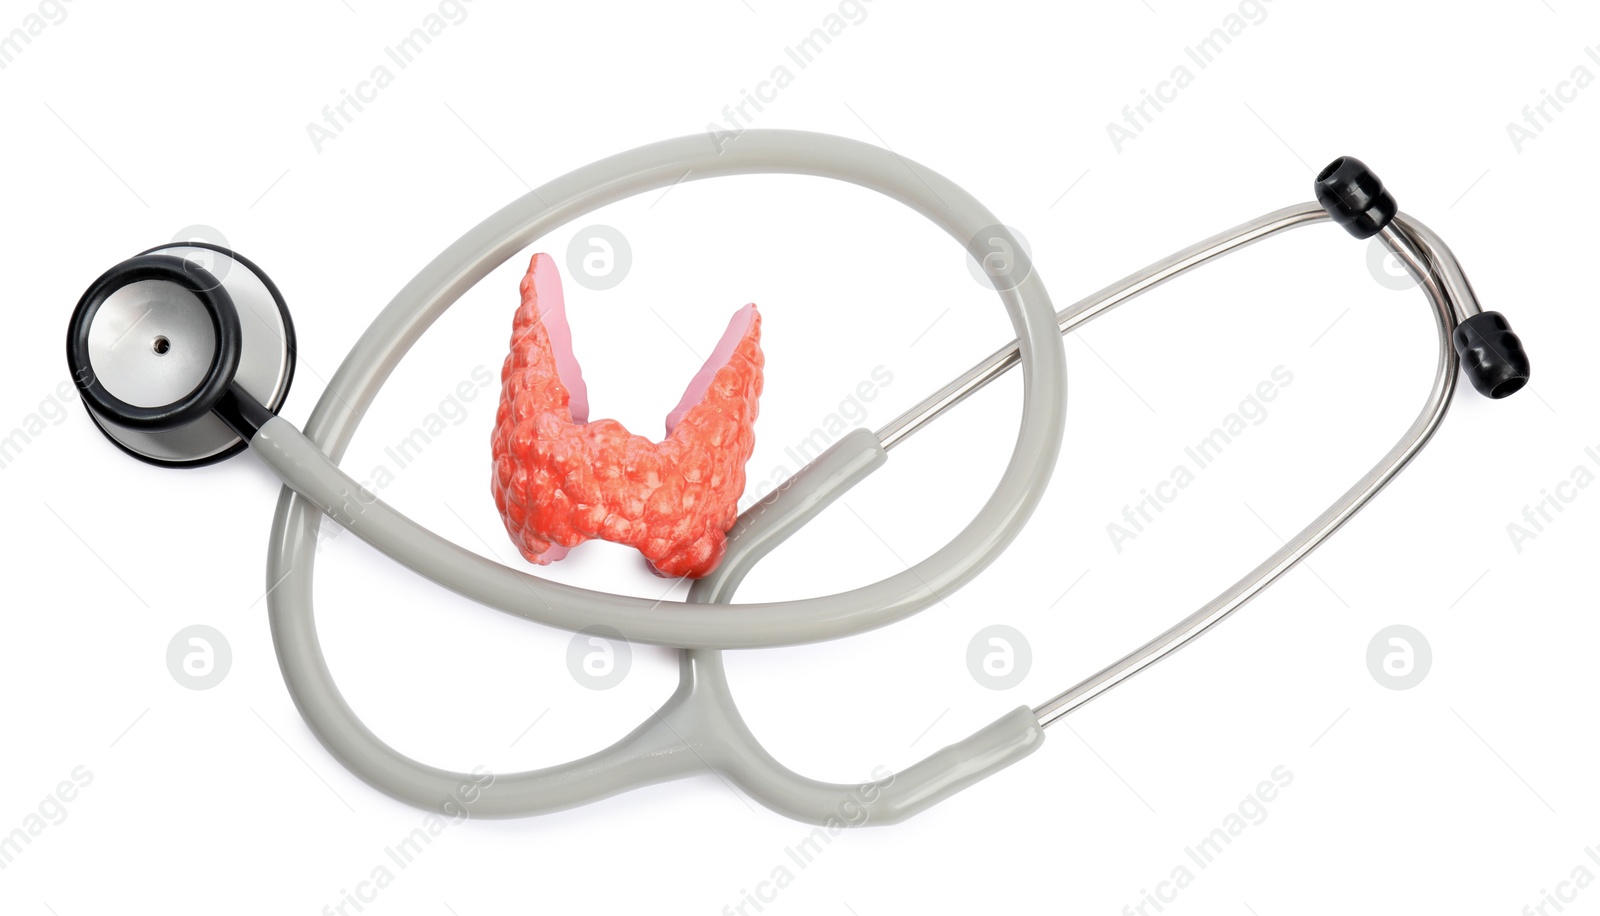 Photo of Plastic model of afflicted thyroid and stethoscope on white background, top view